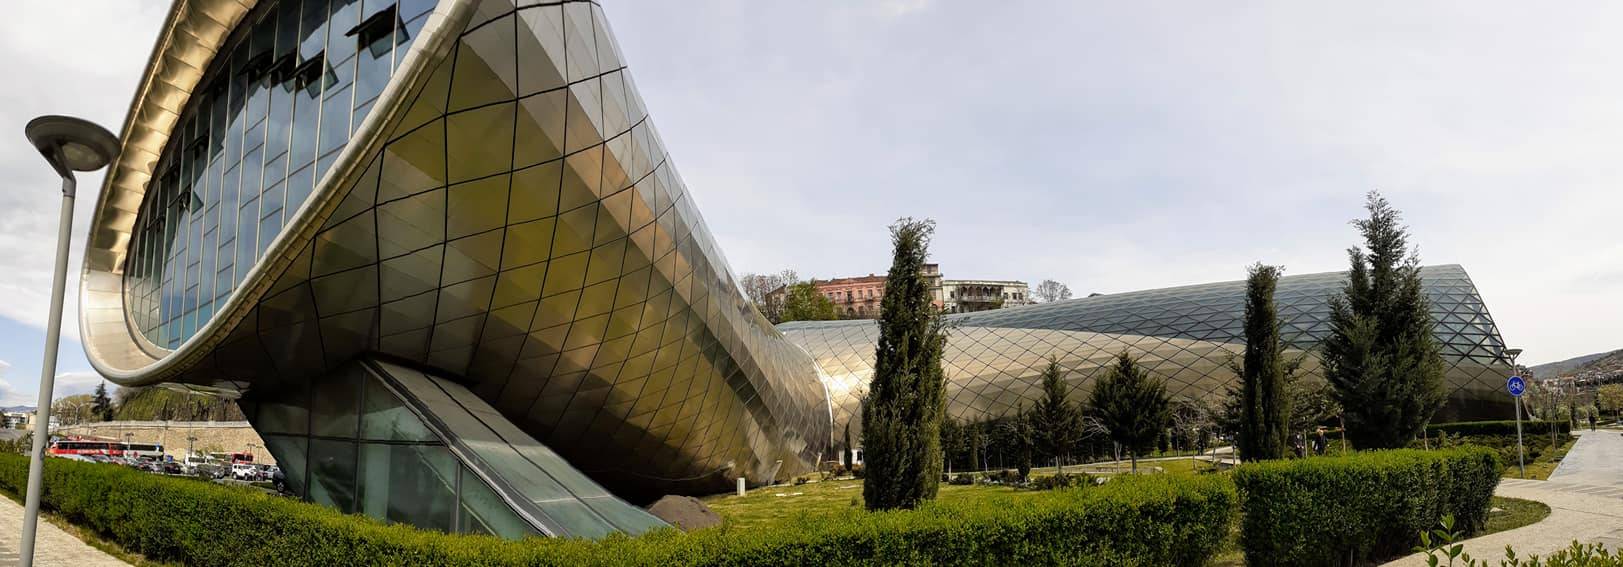 Architecture of Tbilisi: Rike Concert Hall - Tbilisi Nomad (@steem-beat)